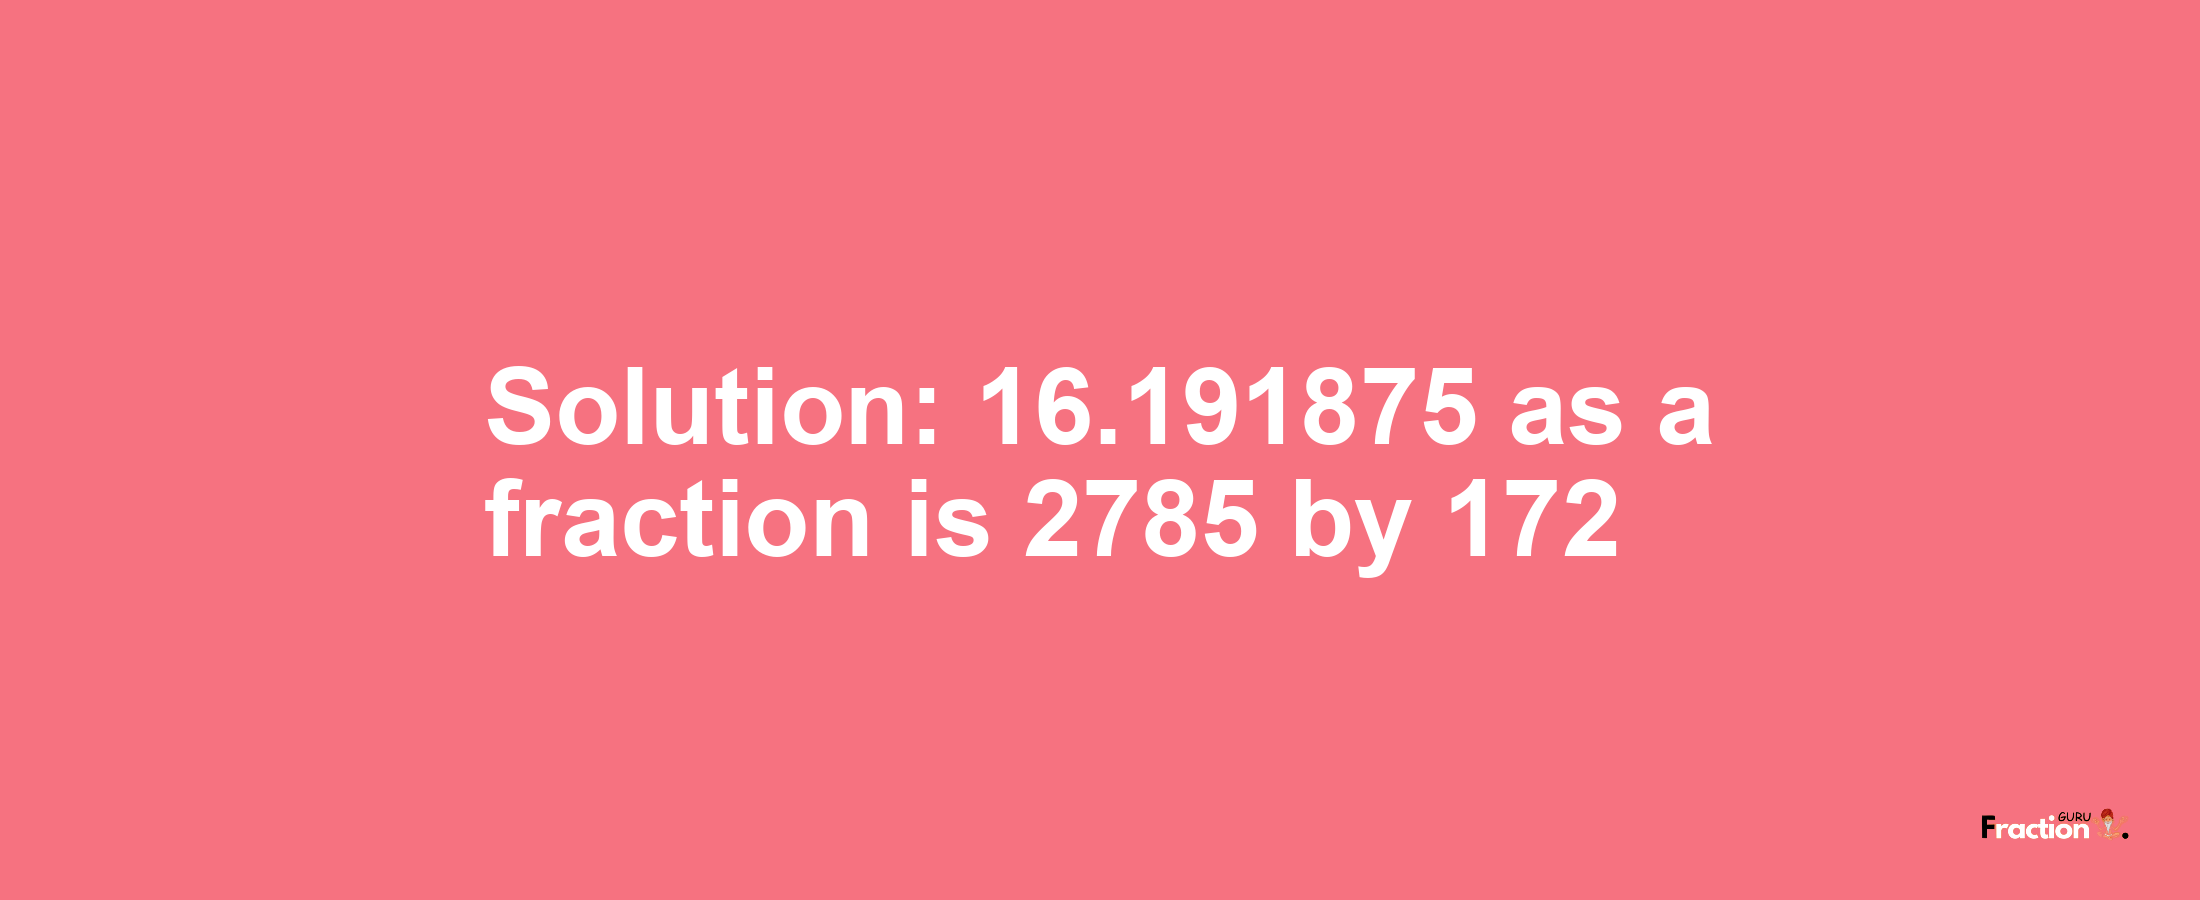 Solution:16.191875 as a fraction is 2785/172